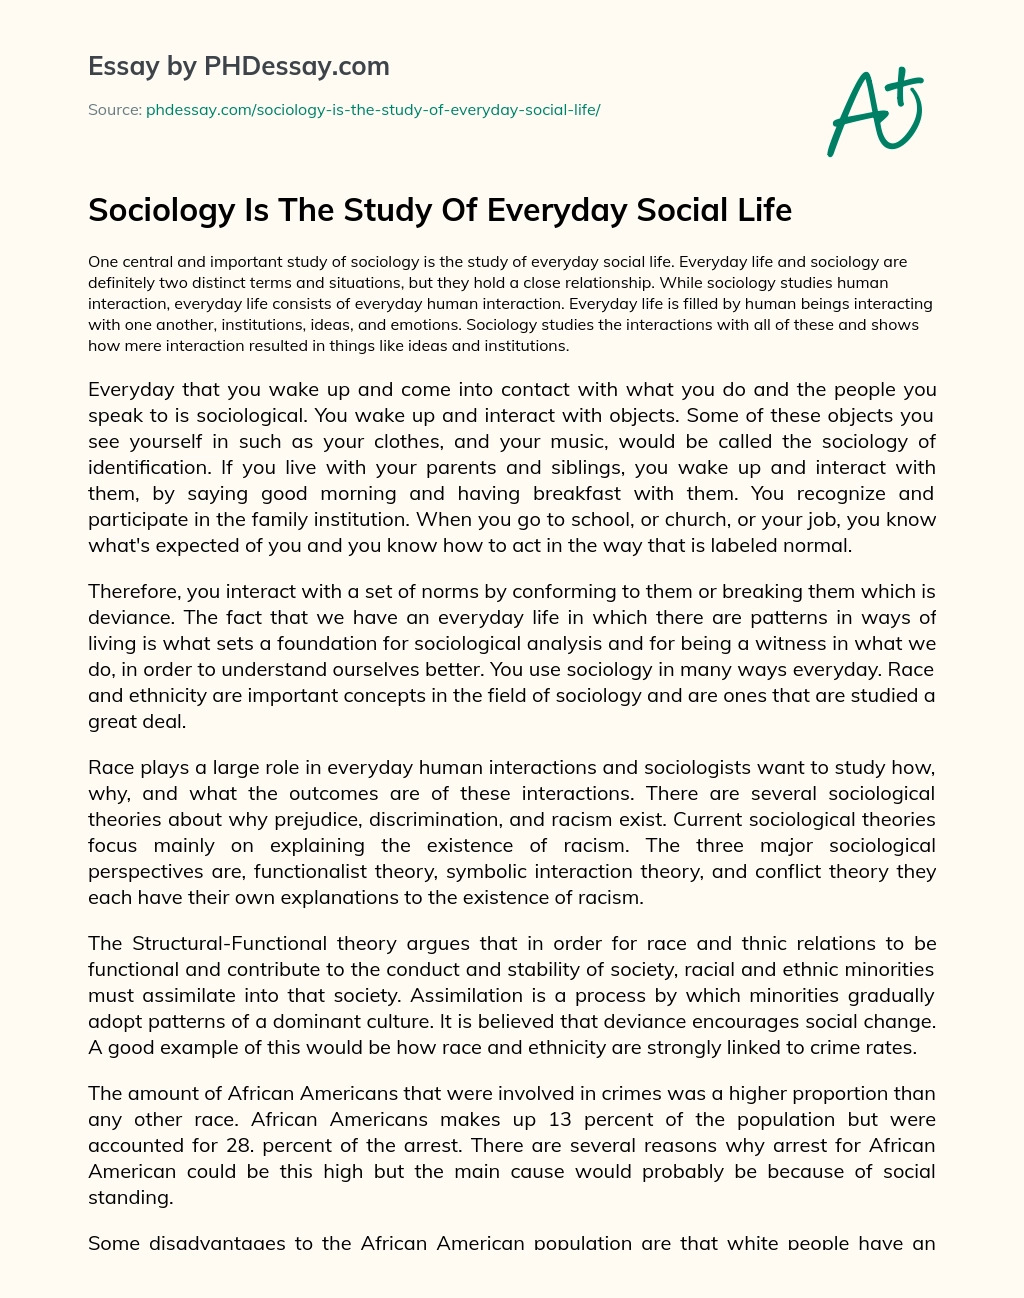 what is social life essay